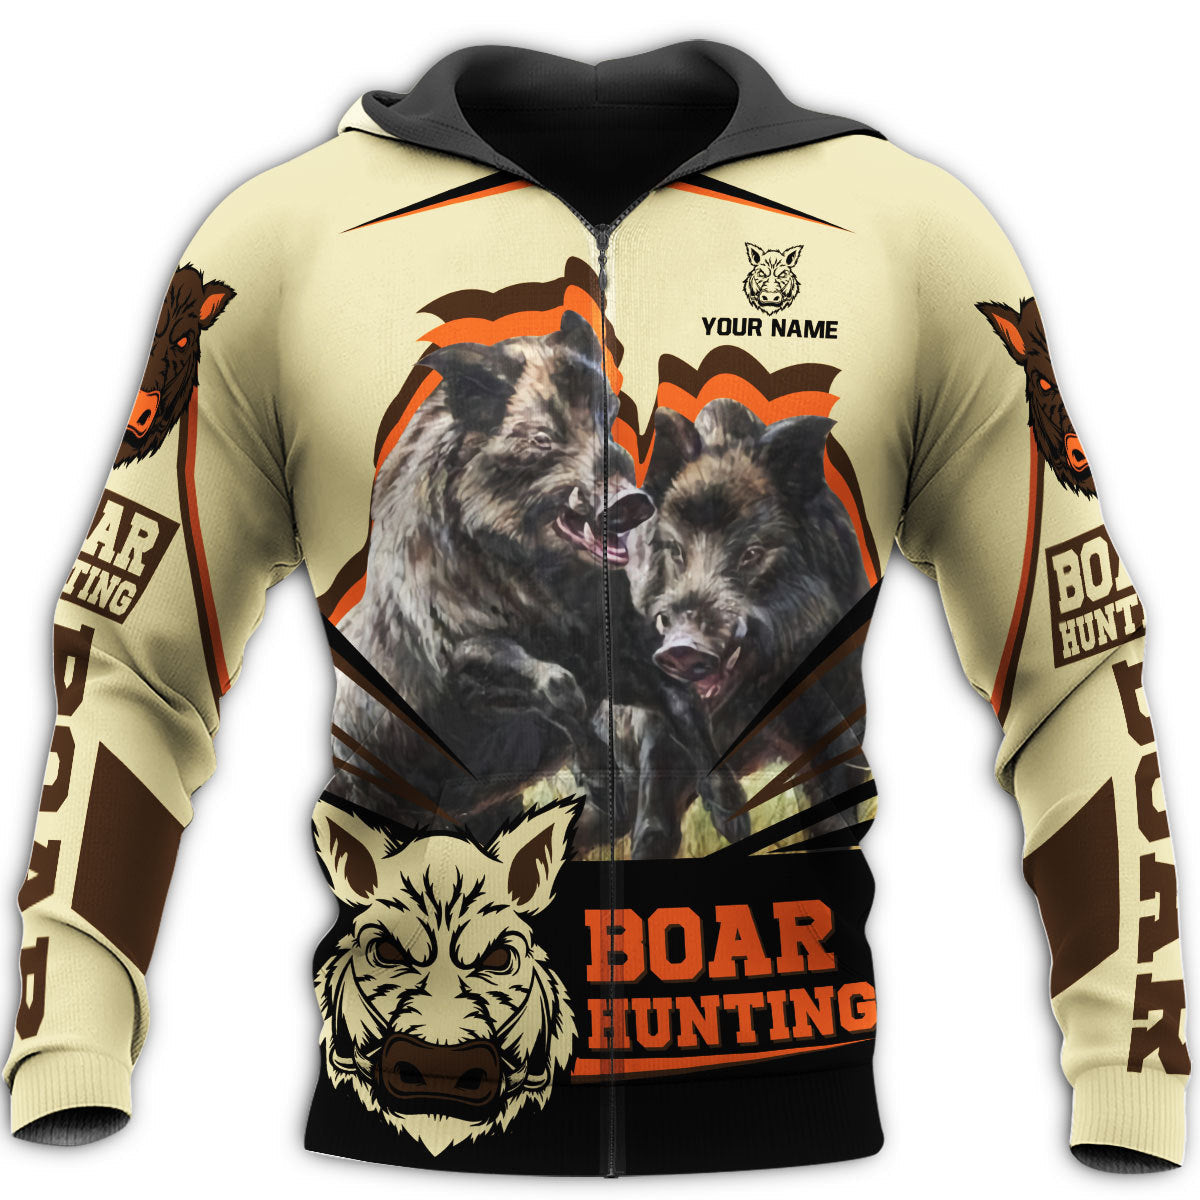 Personalized Name Boar Hunting All Over Printed Unisex Shirt/ Hunting Hoodie/ Boar Hunting Shirt